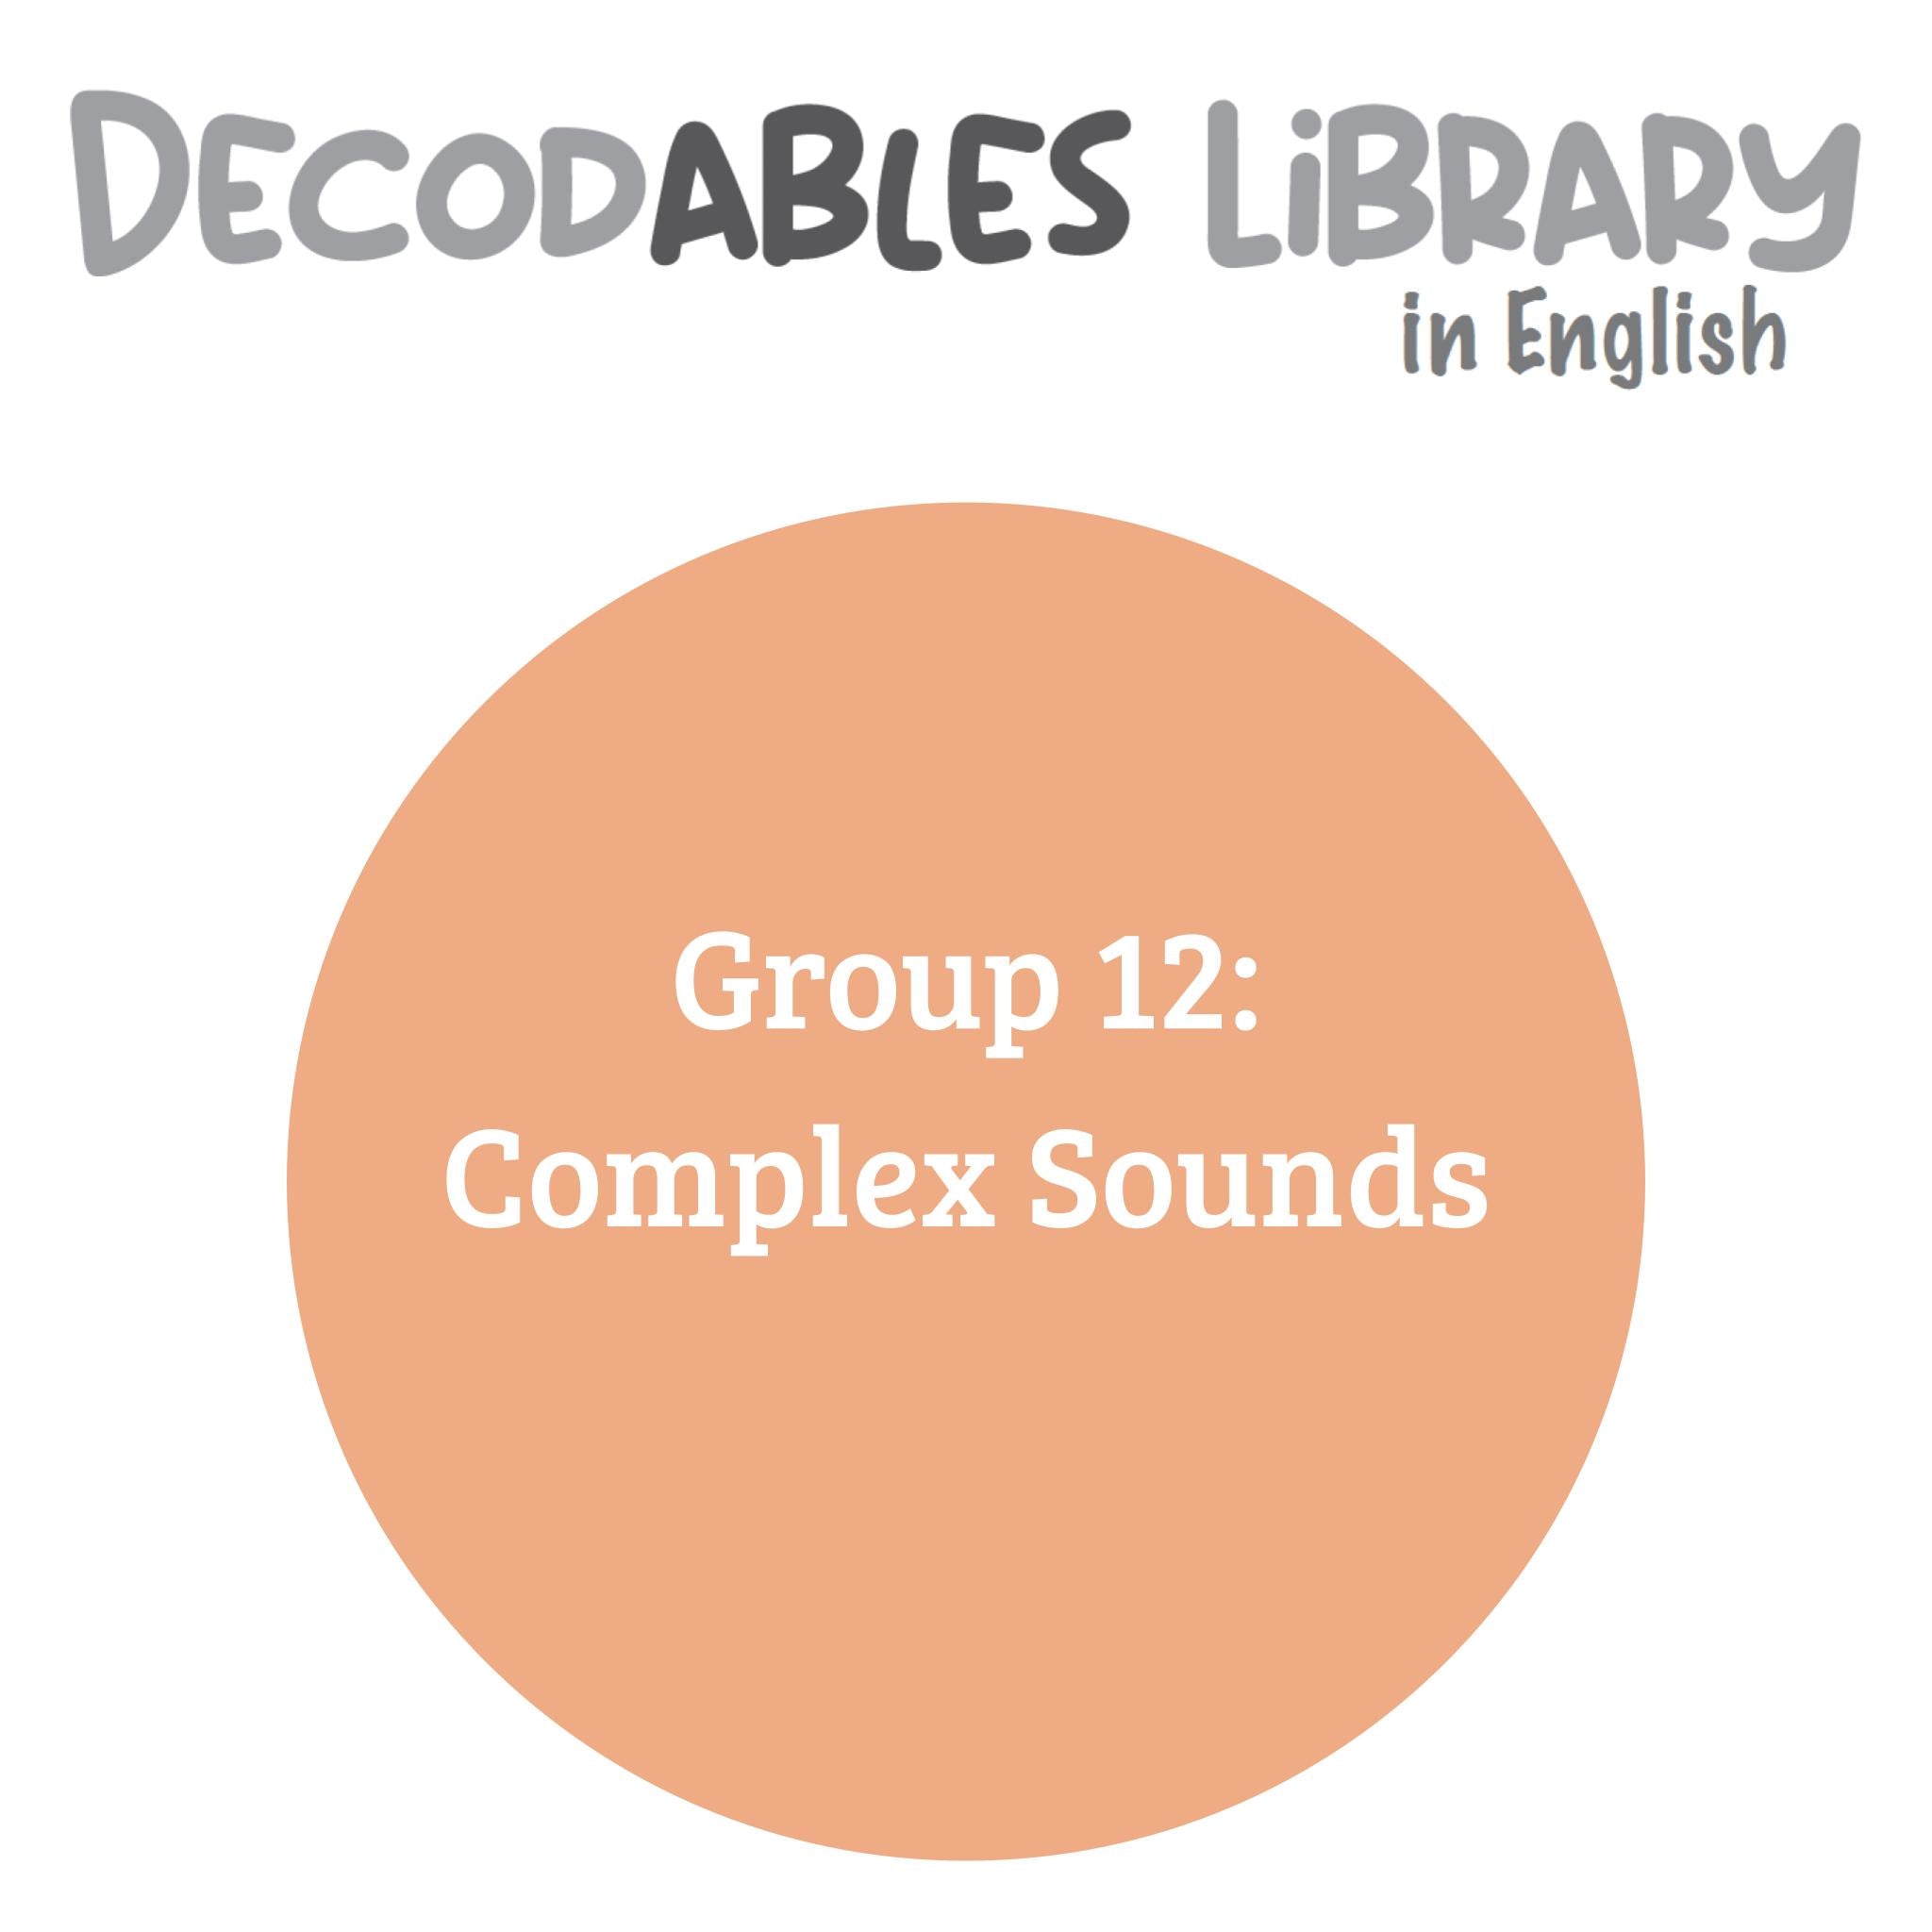 English Decodables Library - Group 12: Complex Sounds (set of 14 titles)